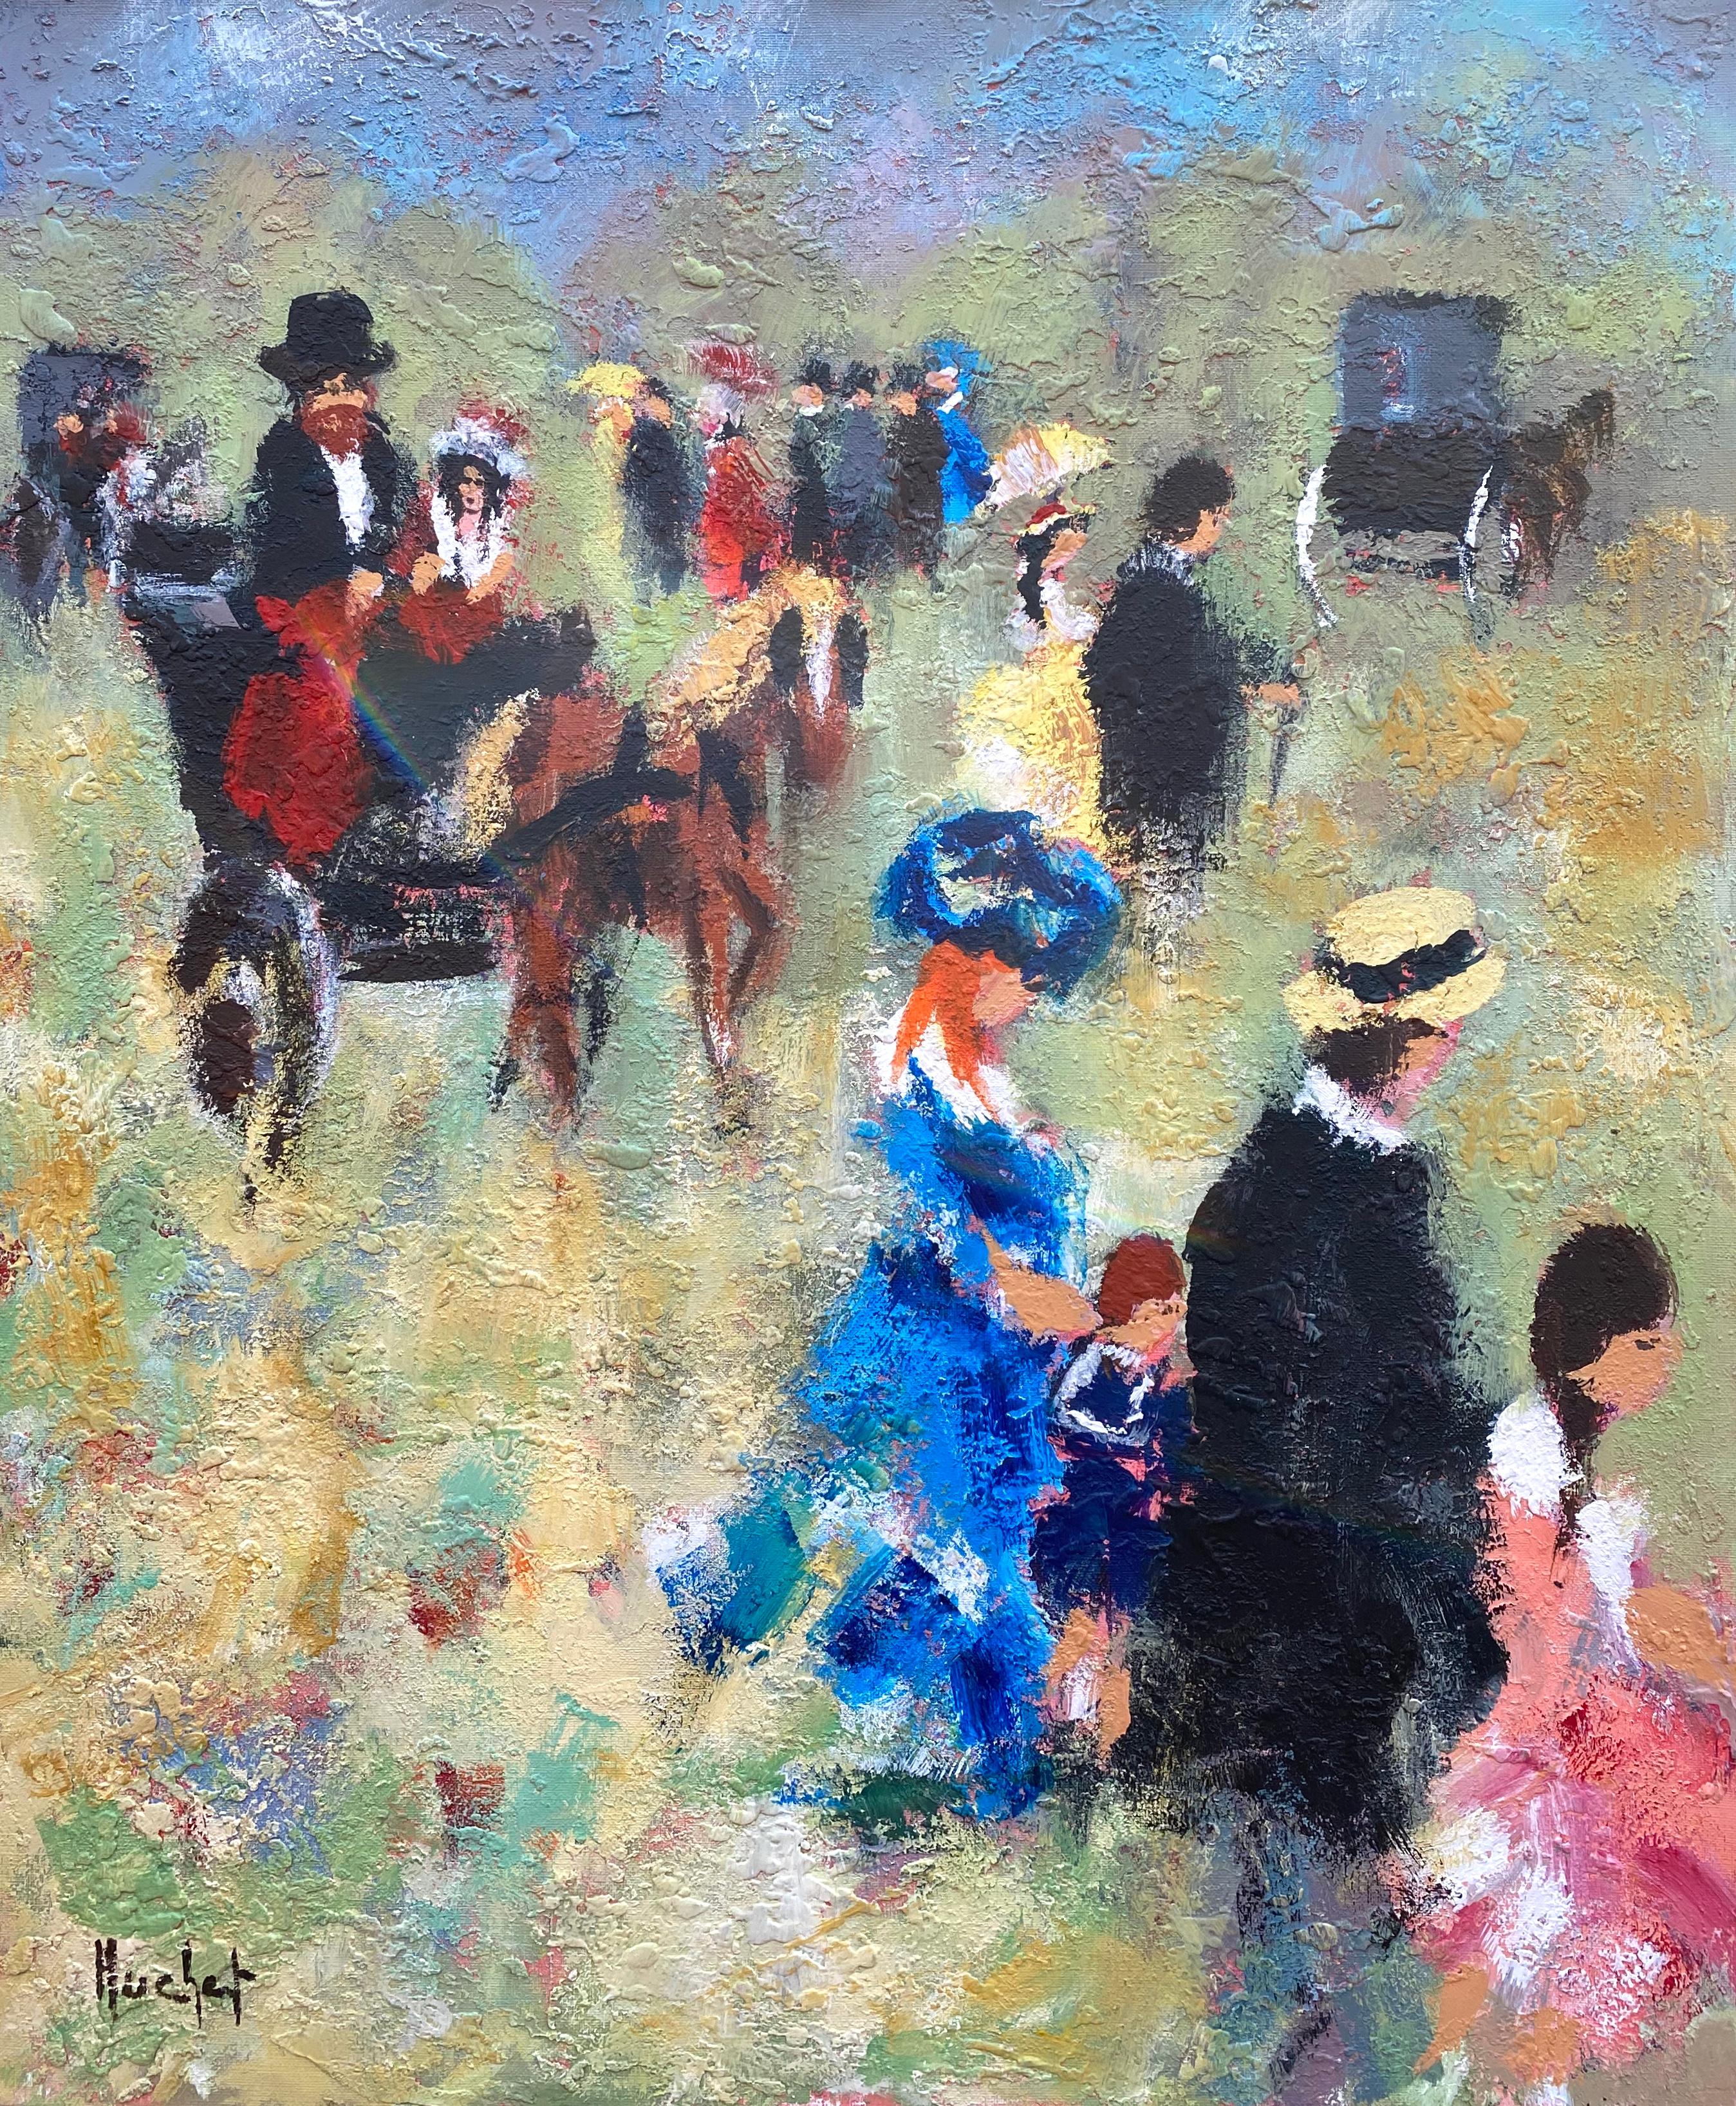 Urbain Huchet Figurative Painting - “Carriages in the Park"